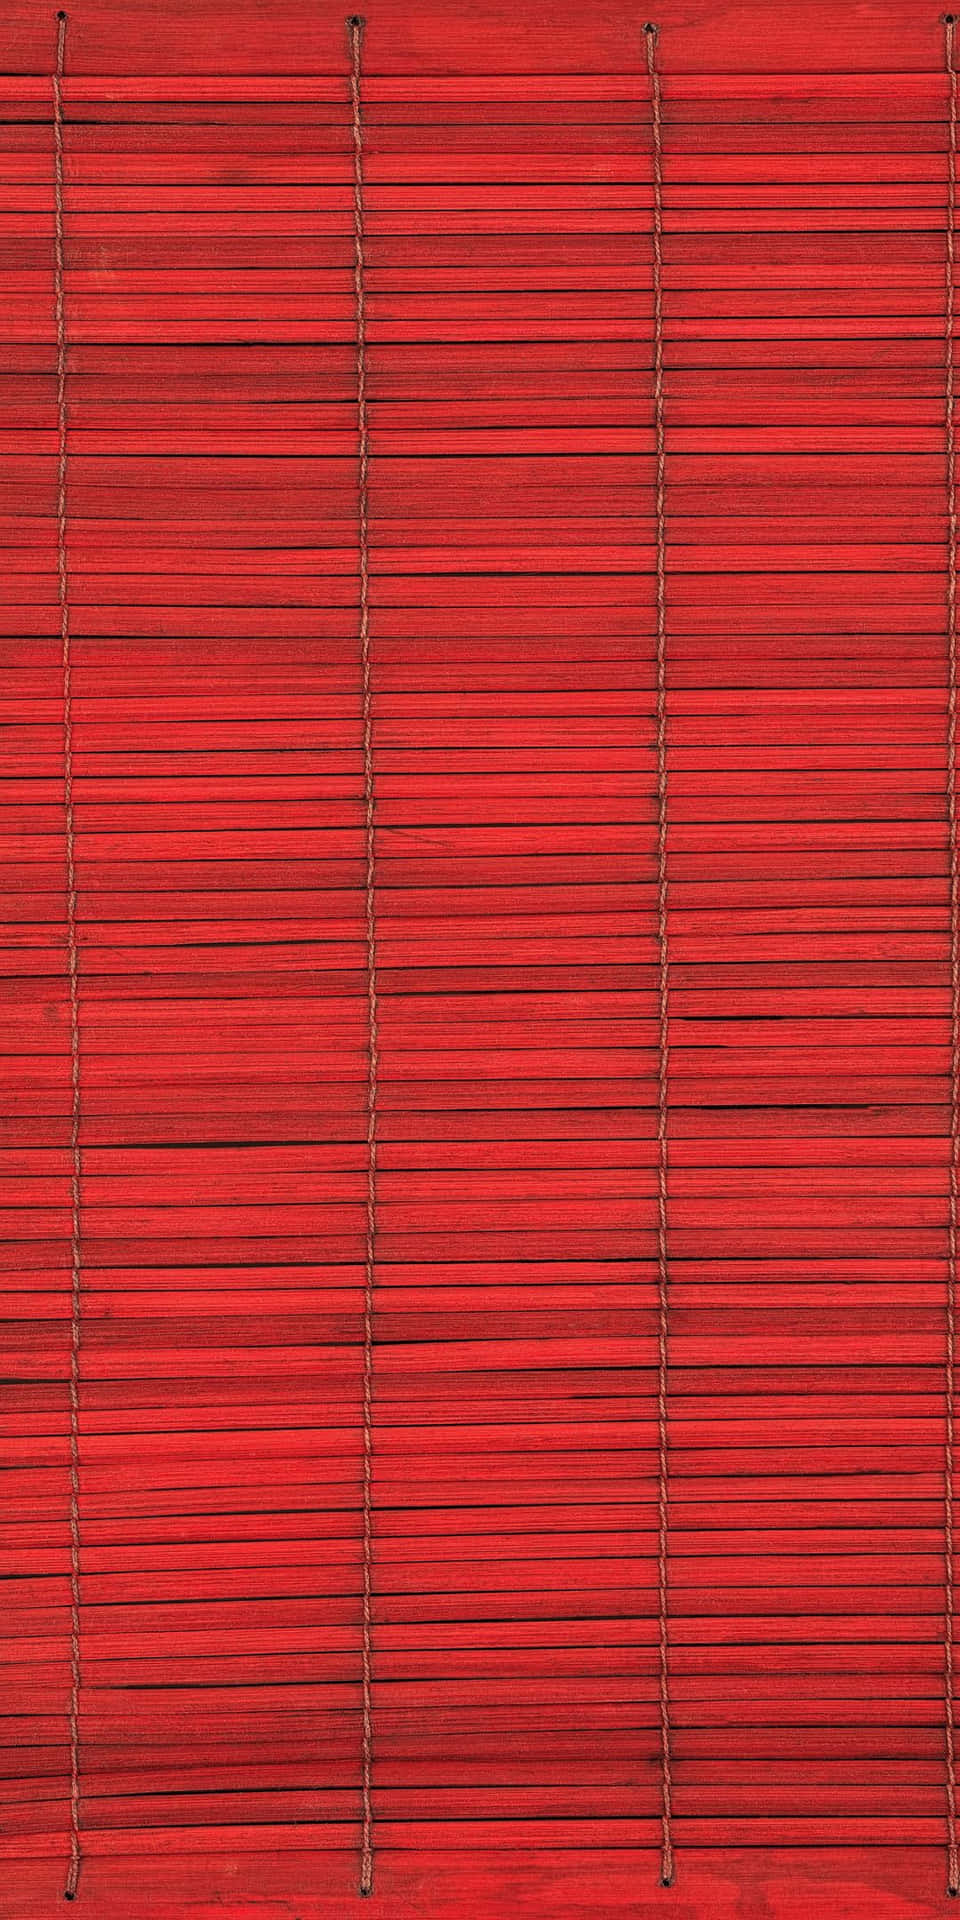 Wooden Red Texture Background